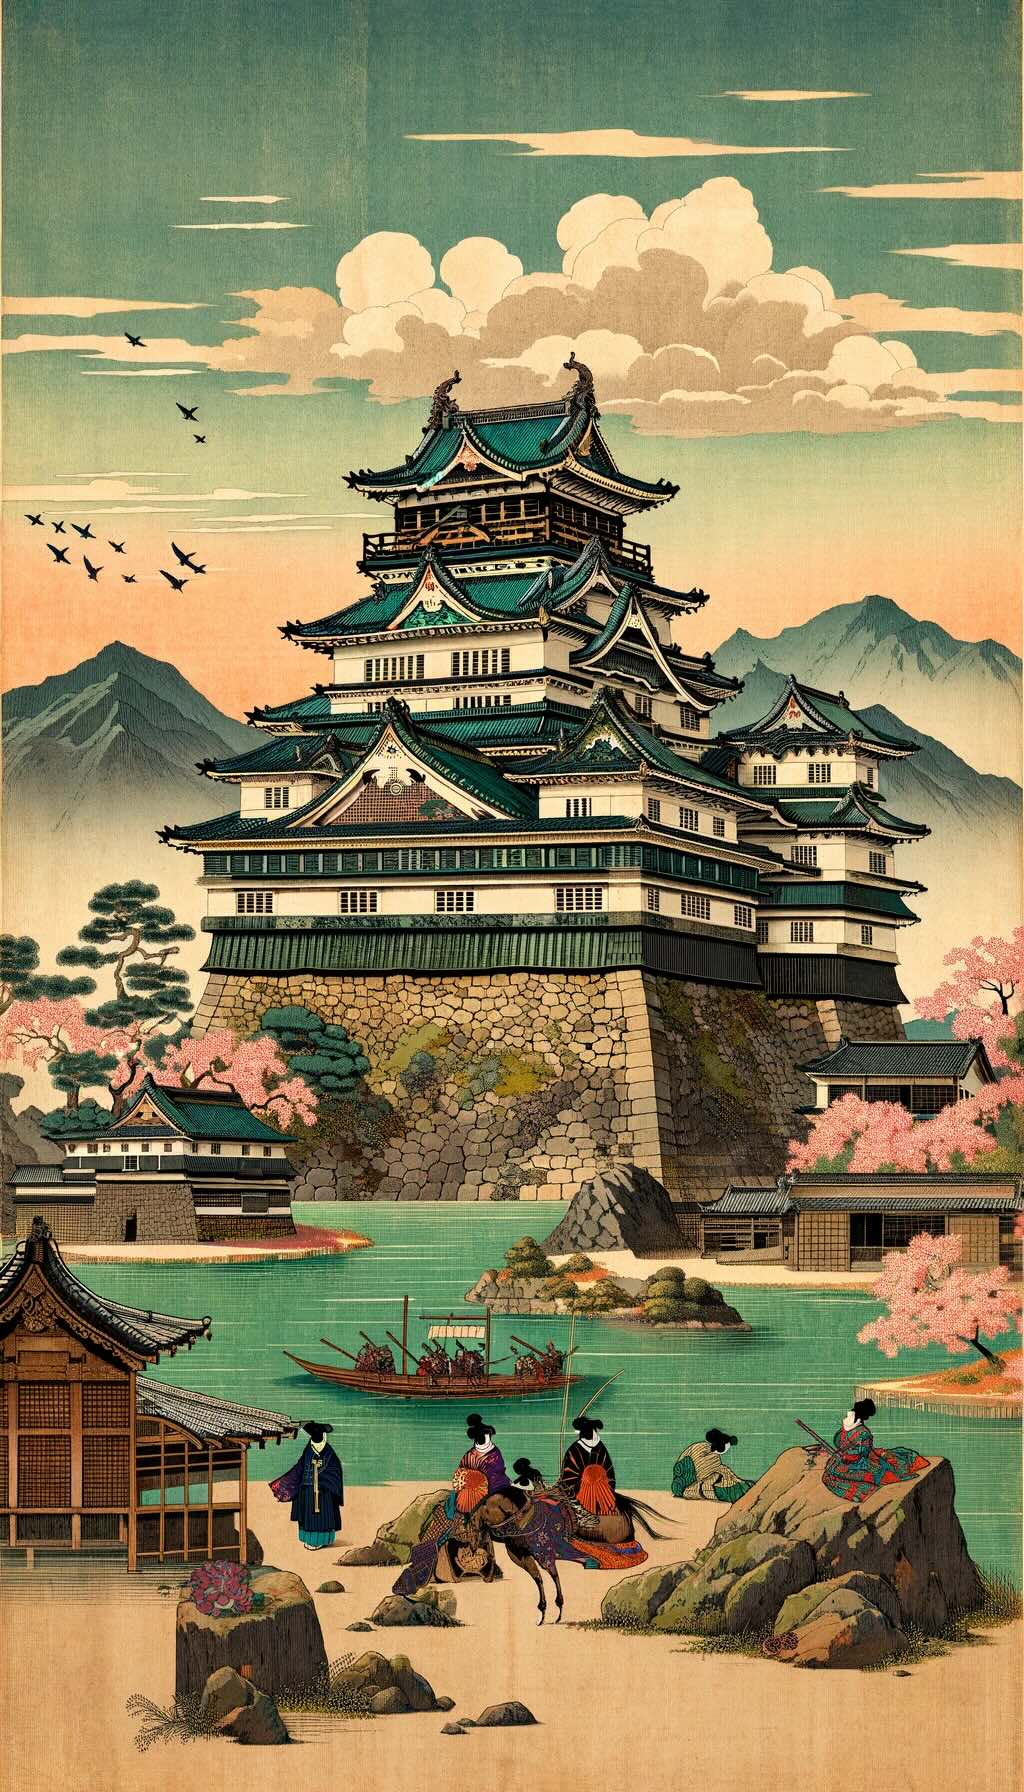 Journey through the historic castles of Japan brings to life the unique architectural style and vibrant historical setting of these castles